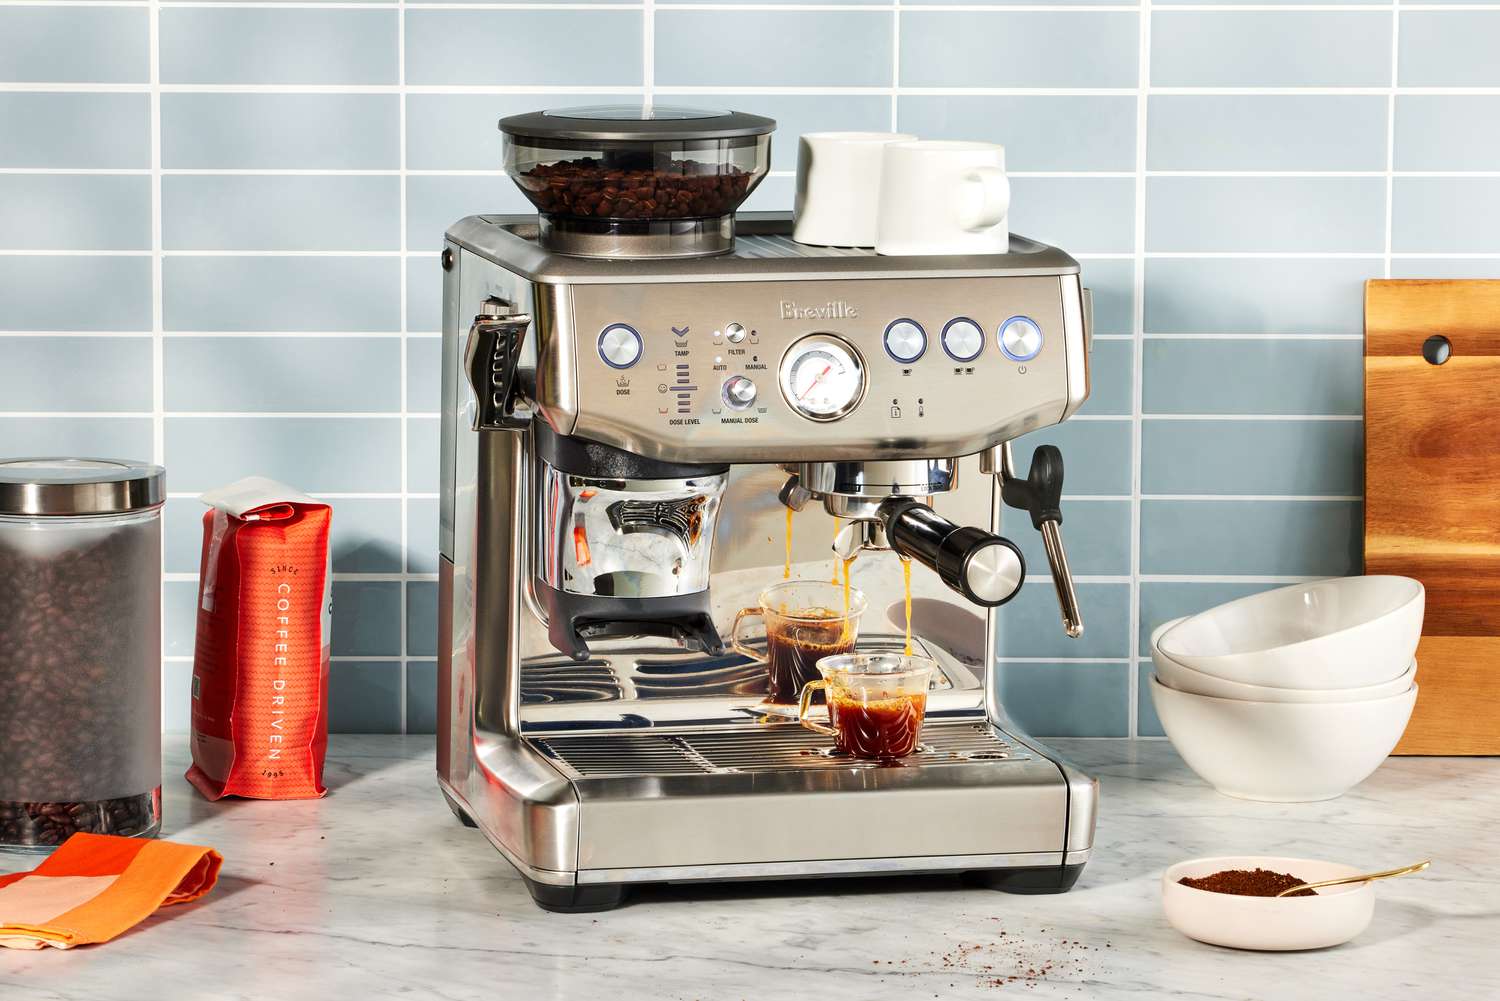 The Breville Barista Express Impress sitting on a counter next to coffee beans.